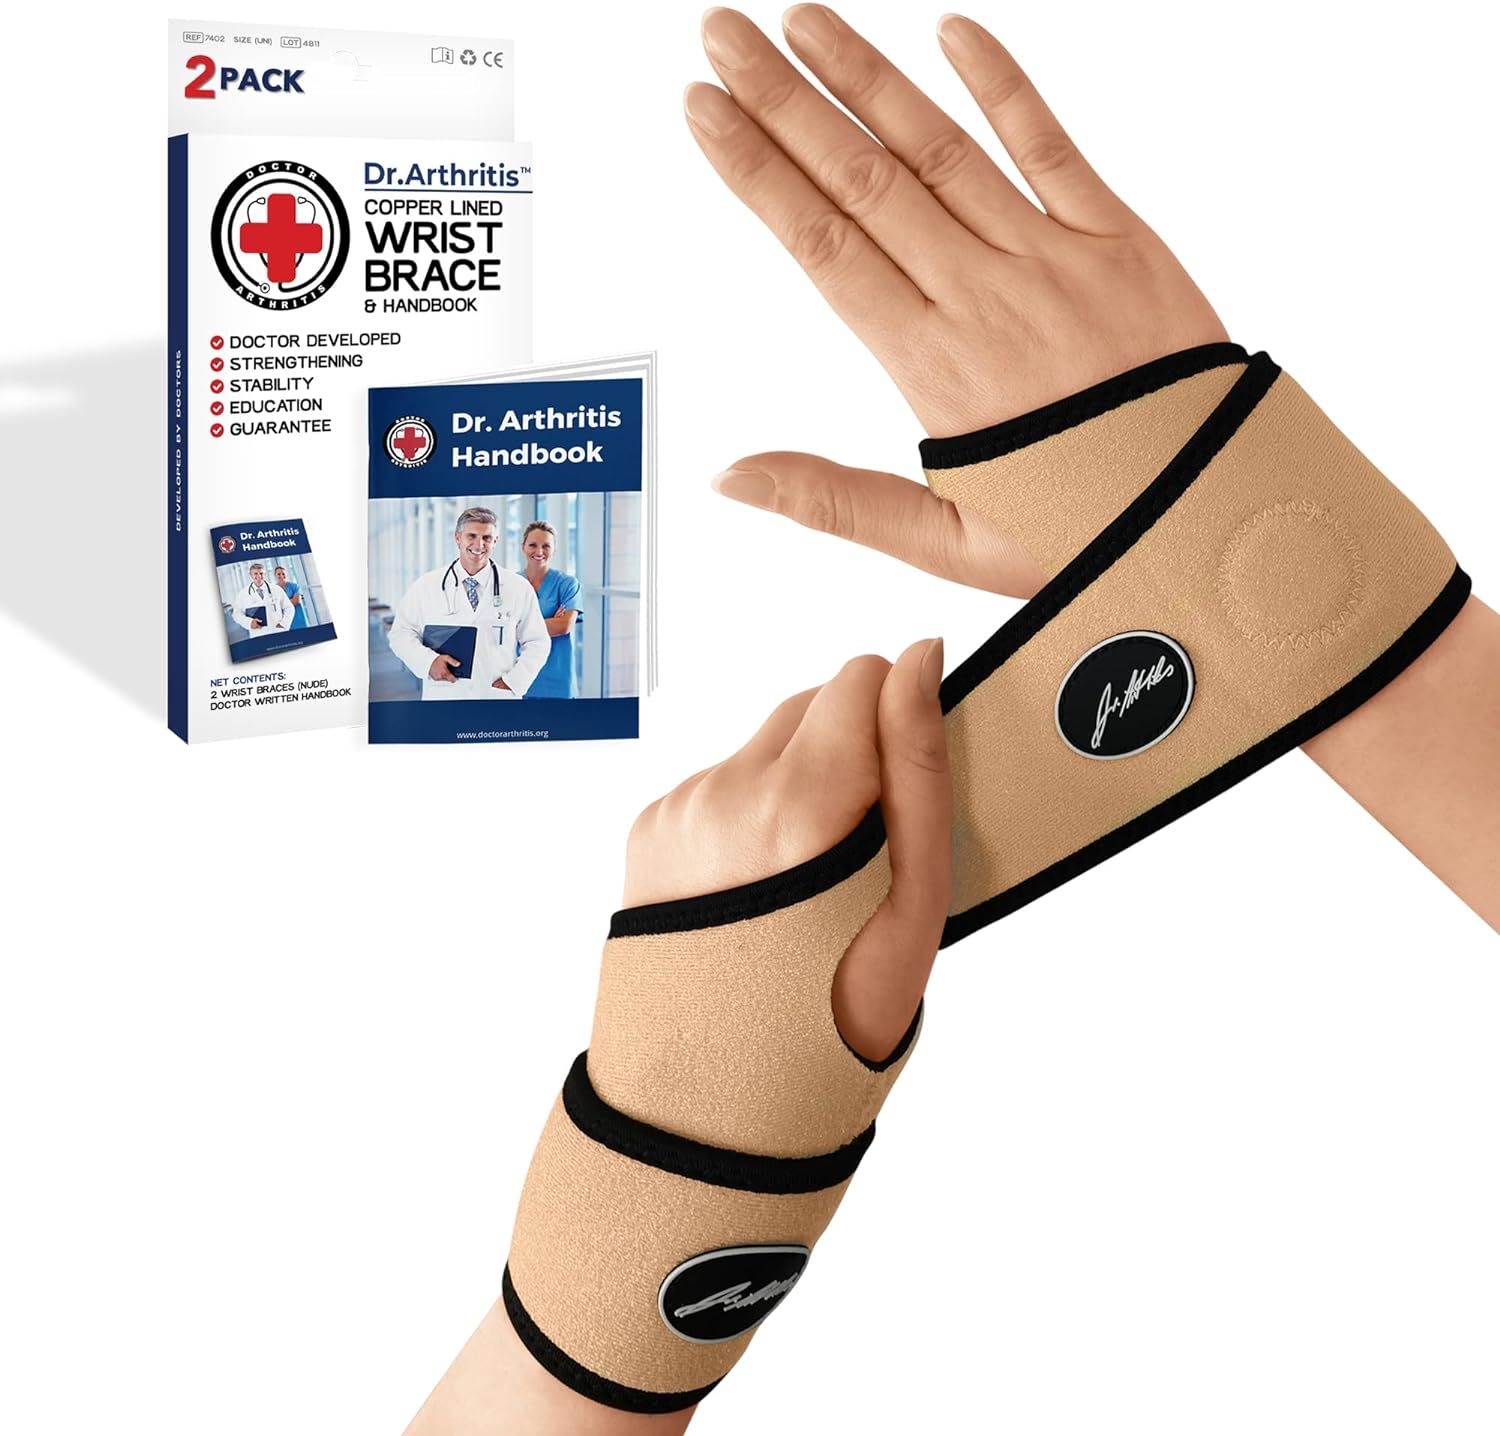 Dr. Arthritis Doctor Developed Comfy, Lightweight, Wrist Support-Strap-Brace-Hand Support, for Bo... | Amazon (US)